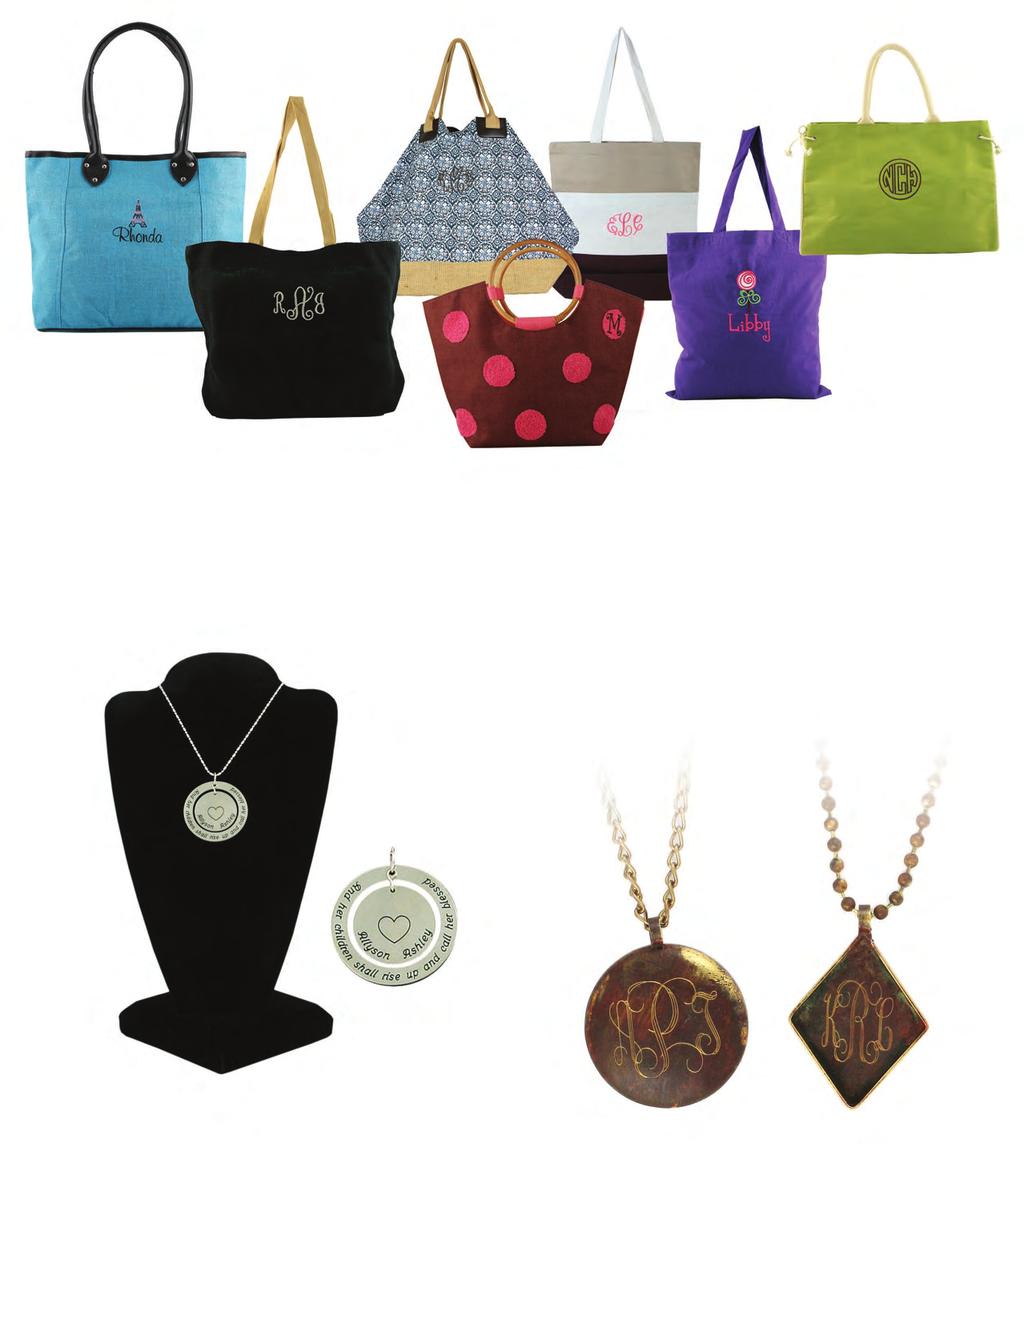 Eco-Savvy Bags, #ZW086 º Mother s Heart Pendants, #Z179 Create a keepsake for mom. Pewter pendants may be personalized with children s names or a single monogram. Several verse sayings to choose from.